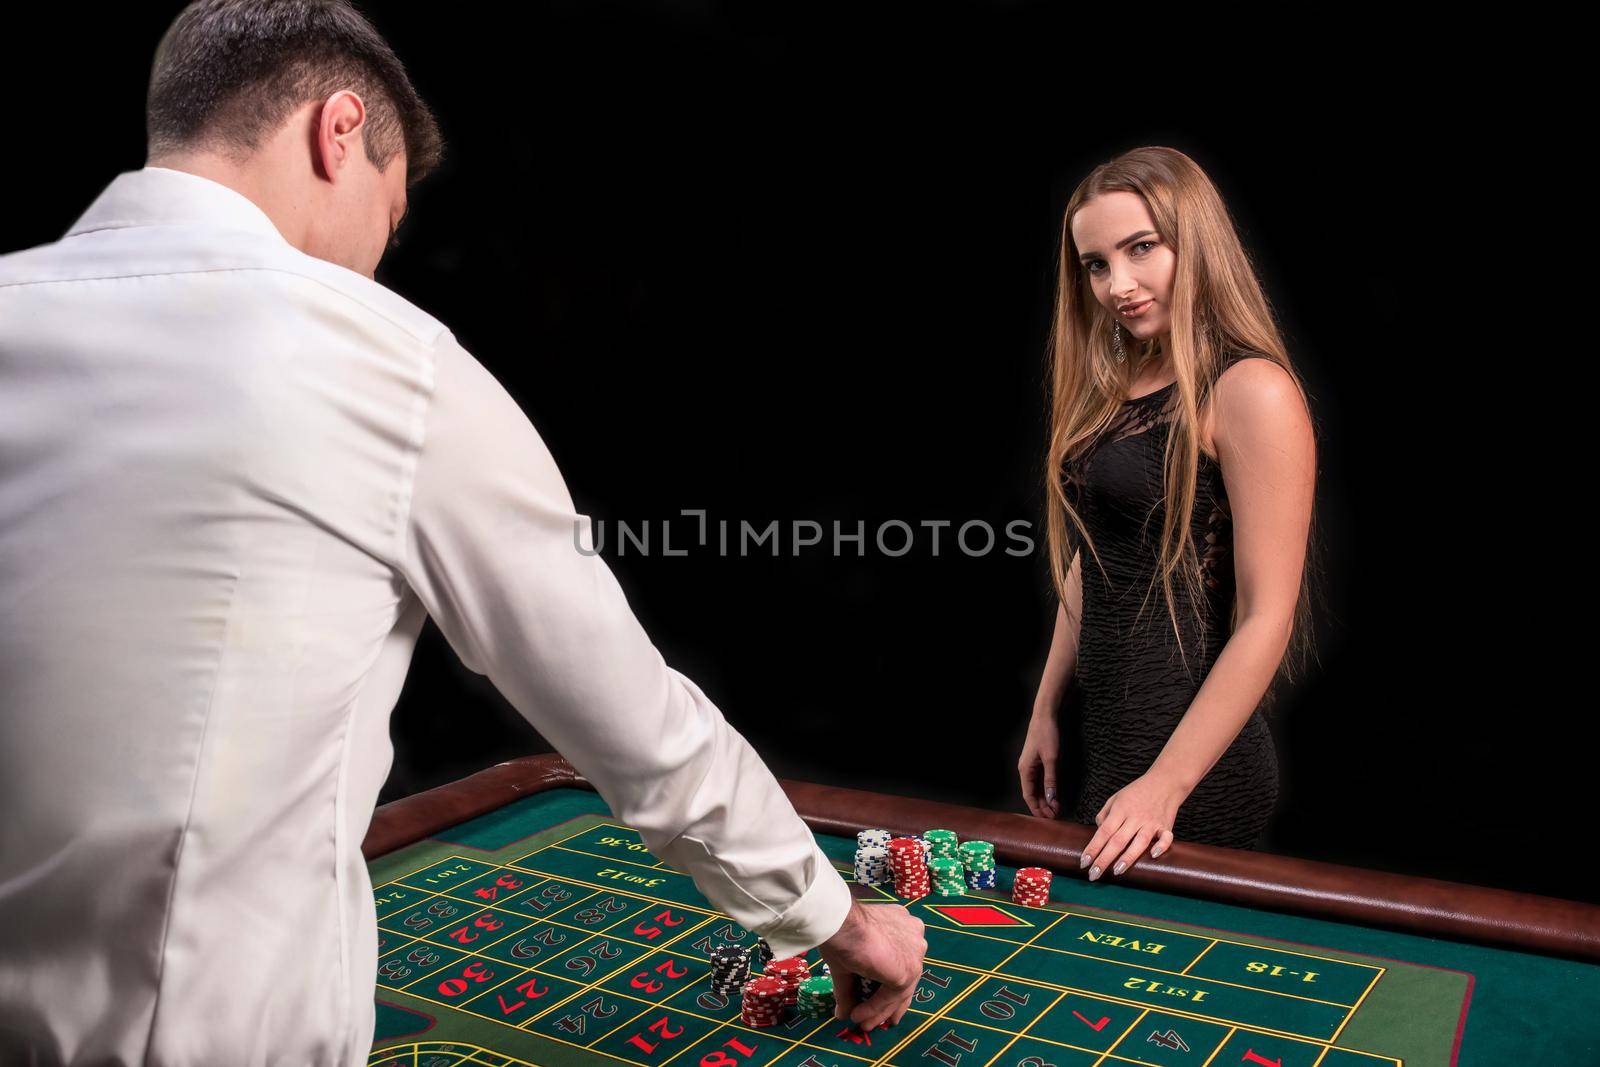 A close-up on the back of the croupier in a white shirt, image of green casino table with roulette and chips, a rich woman betting of gambling in the background. Casino. Gambling. Roulette. Betting